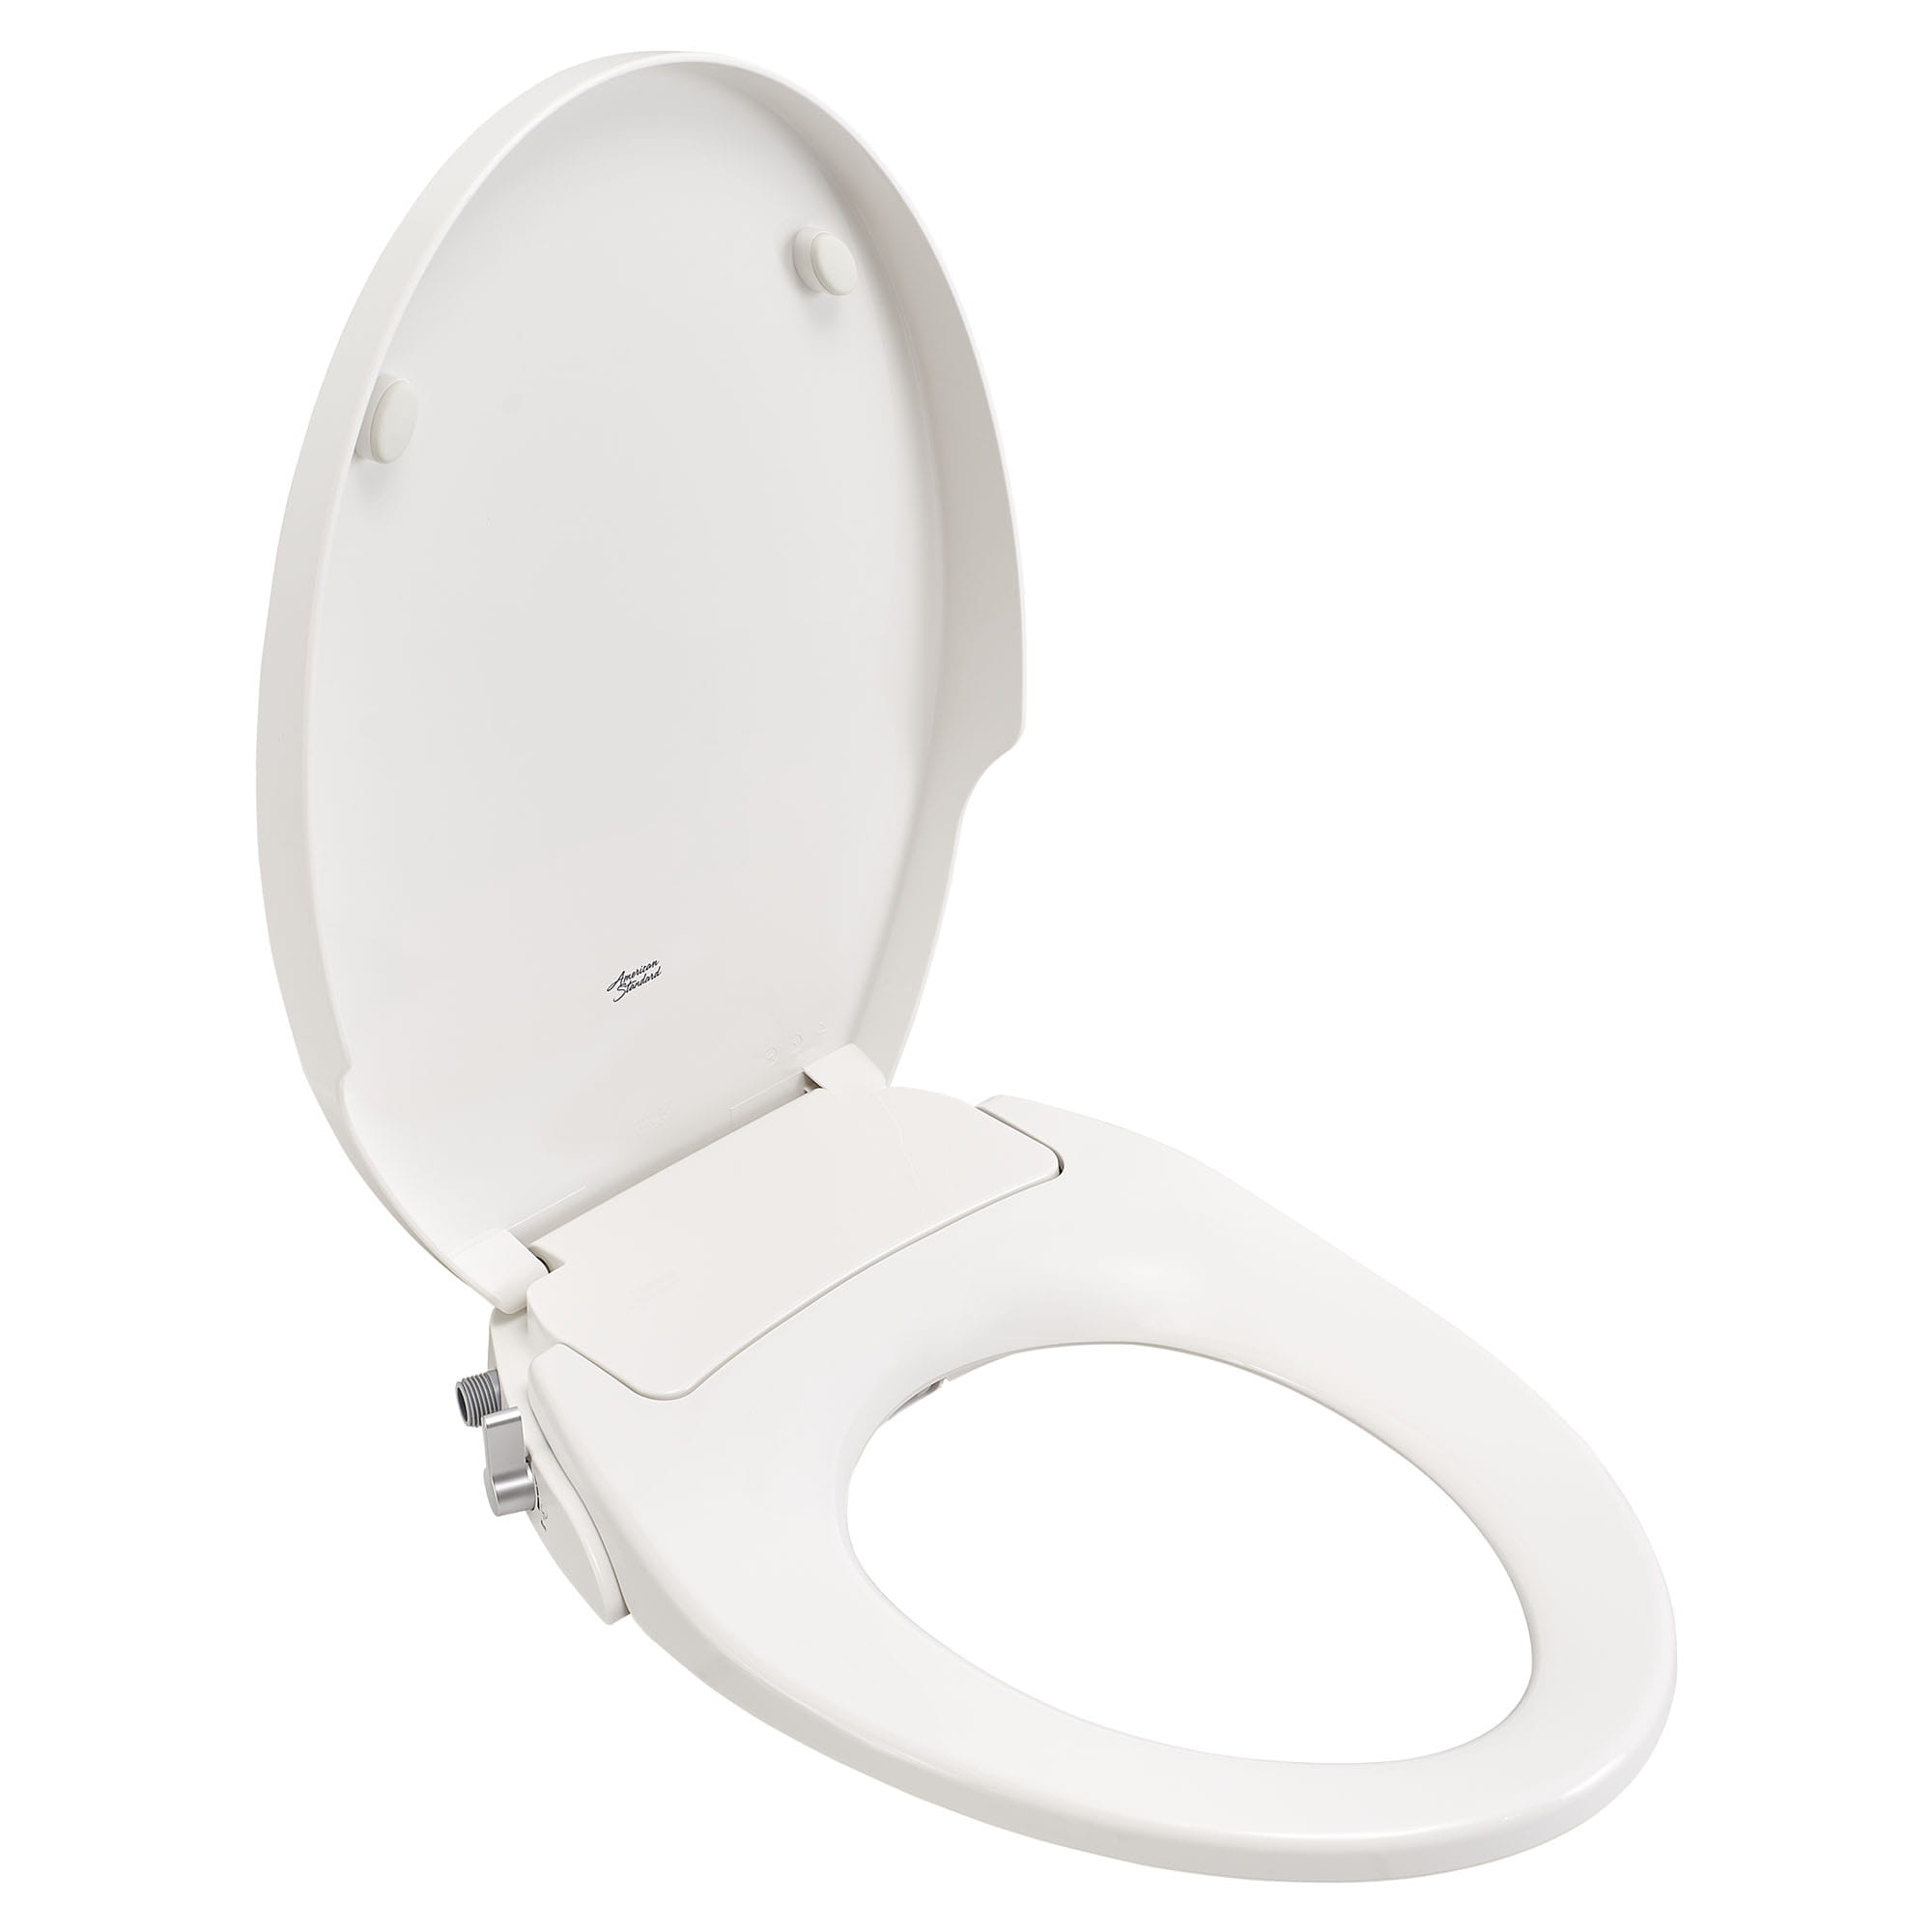 AquaWash® 1.0 Non-Electric SpaLet® Bidet Seat With Manual Operation